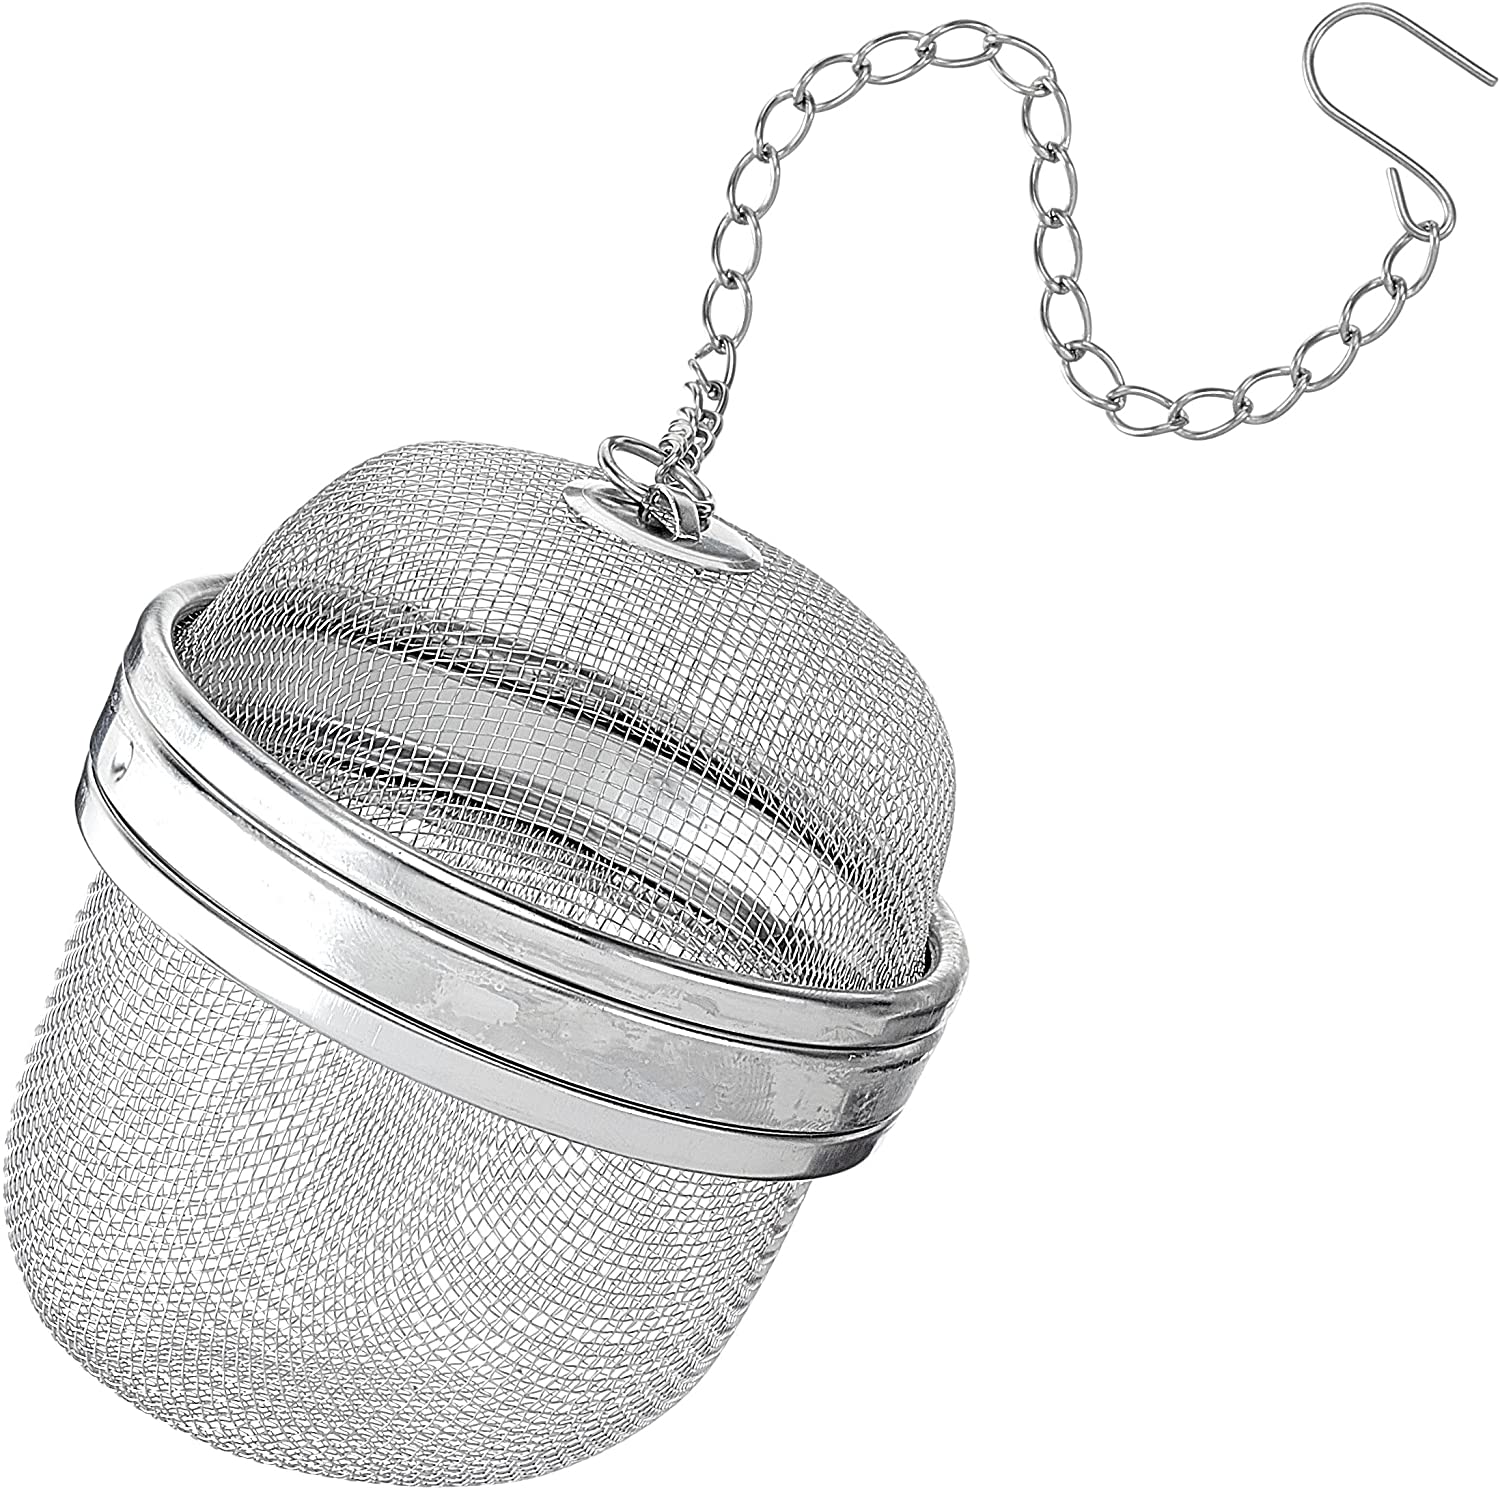 Städter 702059 Tea and Spice Ball Stainless Steel, 6.5 x 6.5 x 6.5 cm Silver